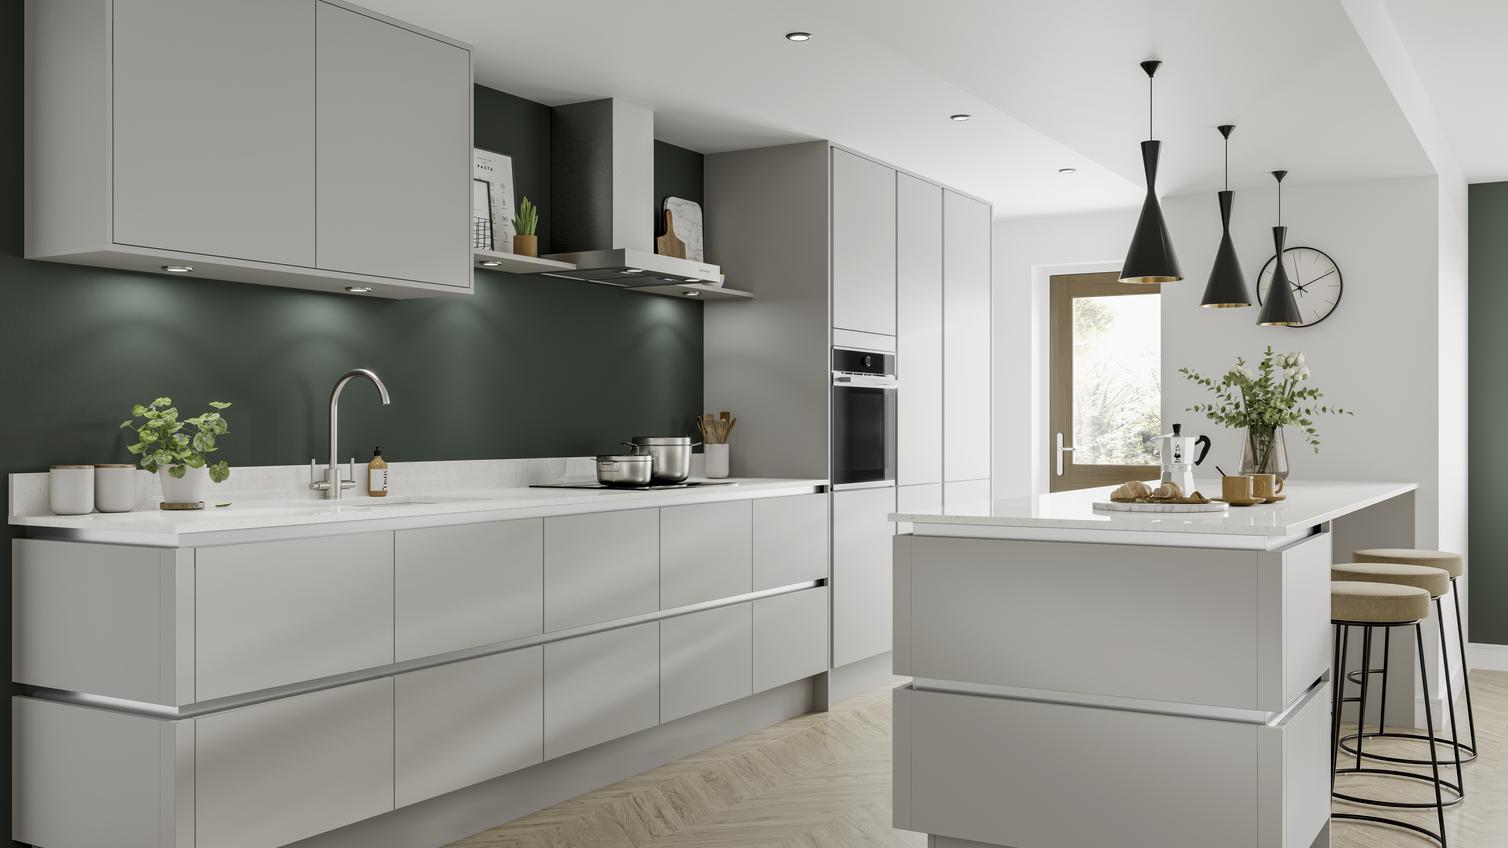 Modern kitchen in dove grey with handleless kitchen doors and cabinet lighting. Breakfast bar with black pendant lights over.